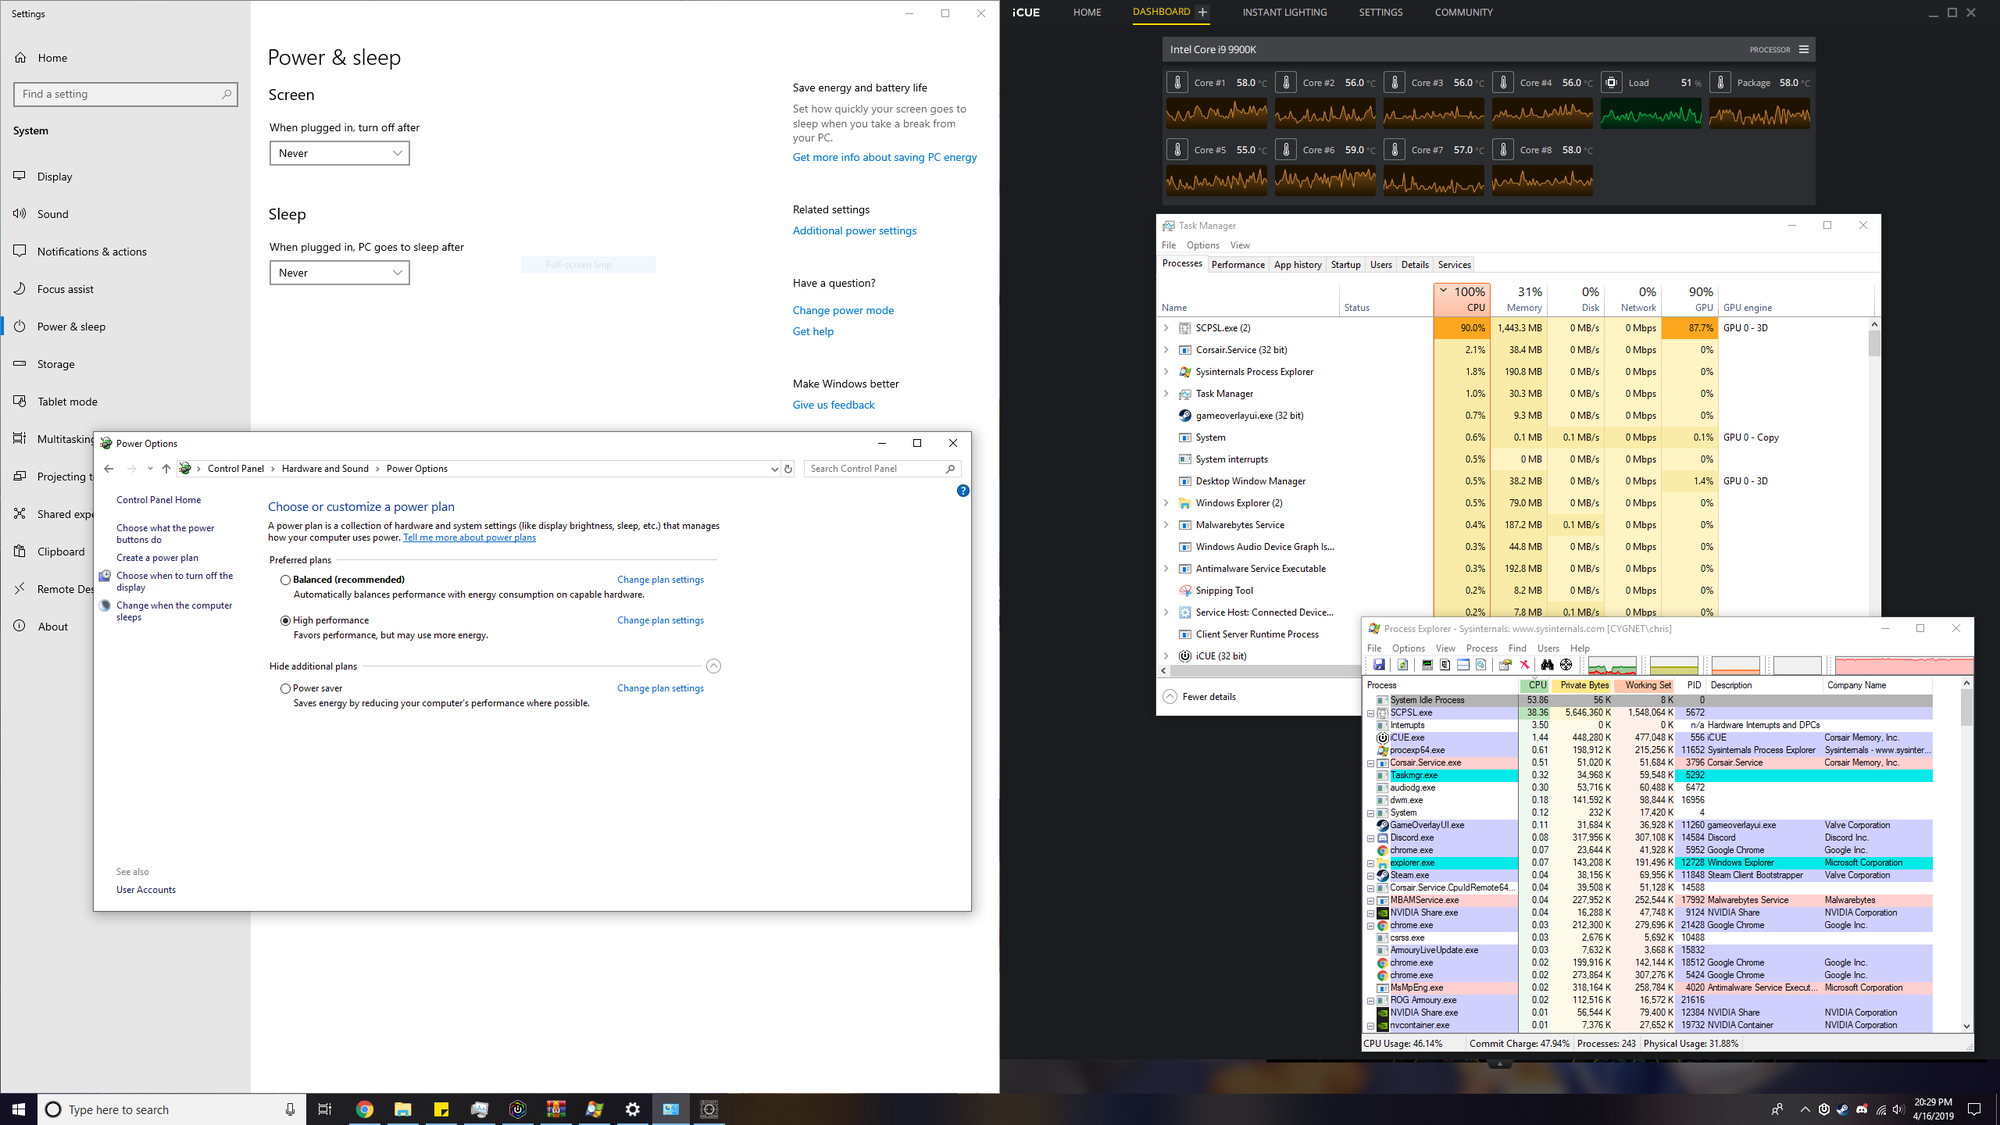 Task manager showing incorrect CPU clock and memory stats ac99c841-4fdf-4a38-8c7d-afc5e21c7069?upload=true.png